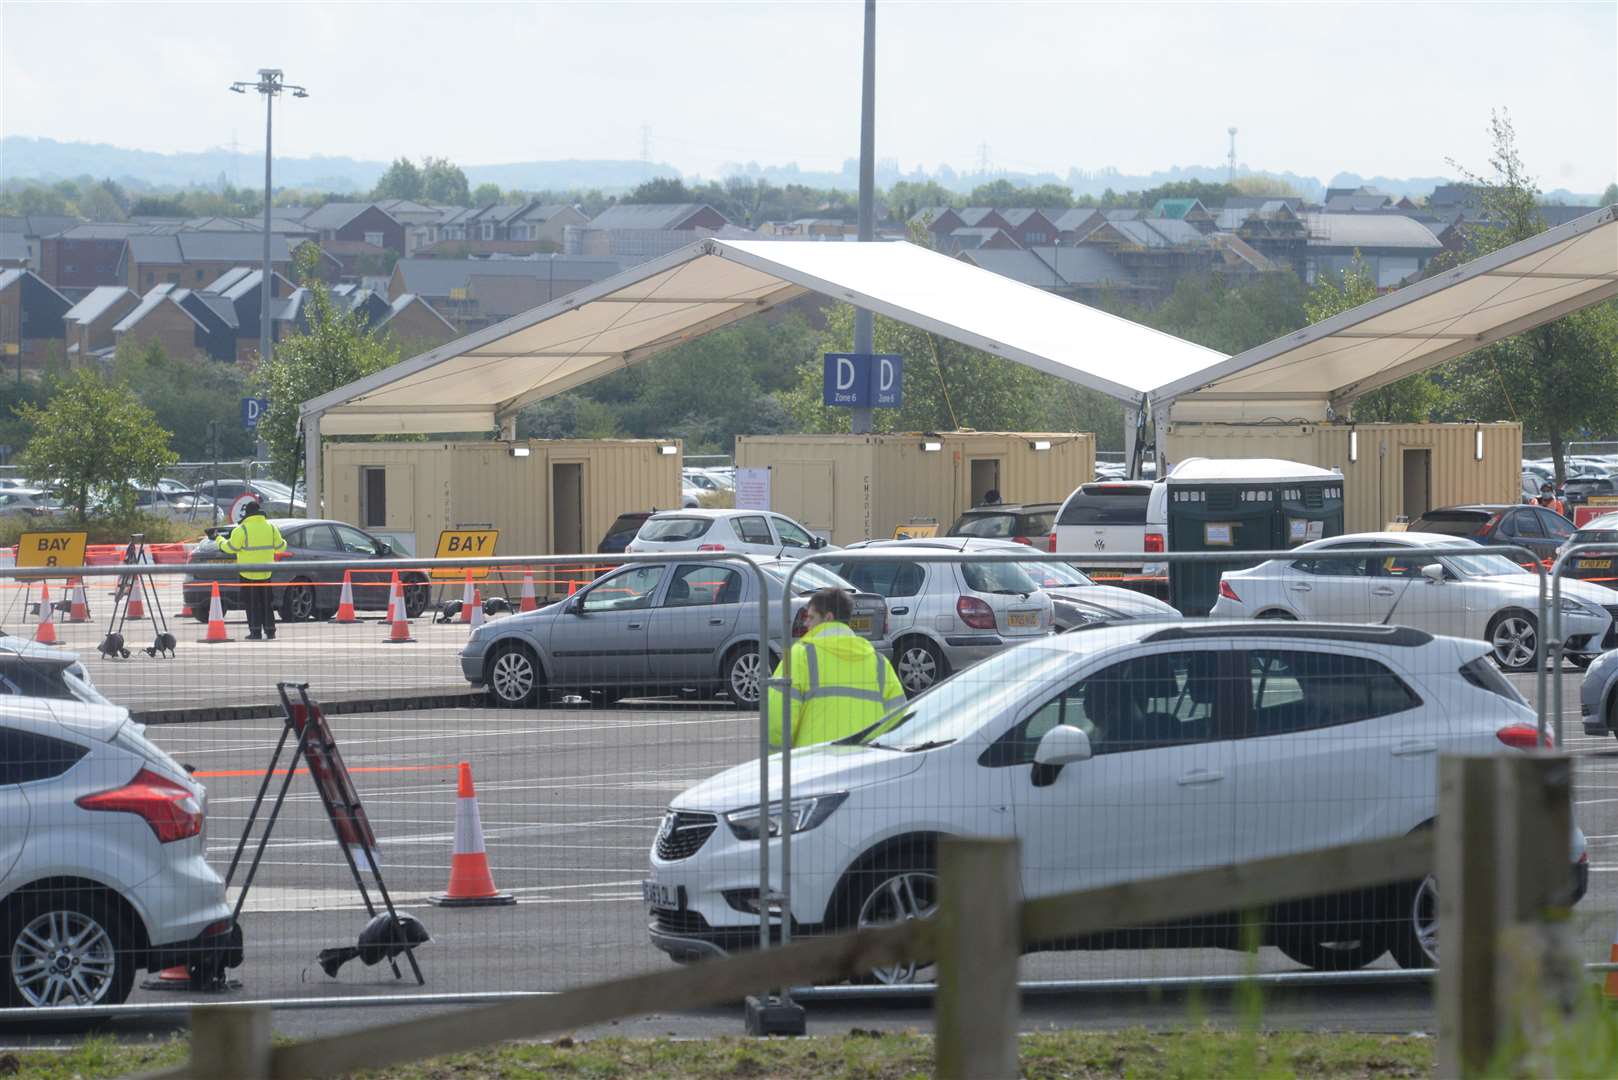 Part of the car at Ebbsfleet International had previously been used for coronavirus testing. Picture: Chris Davey